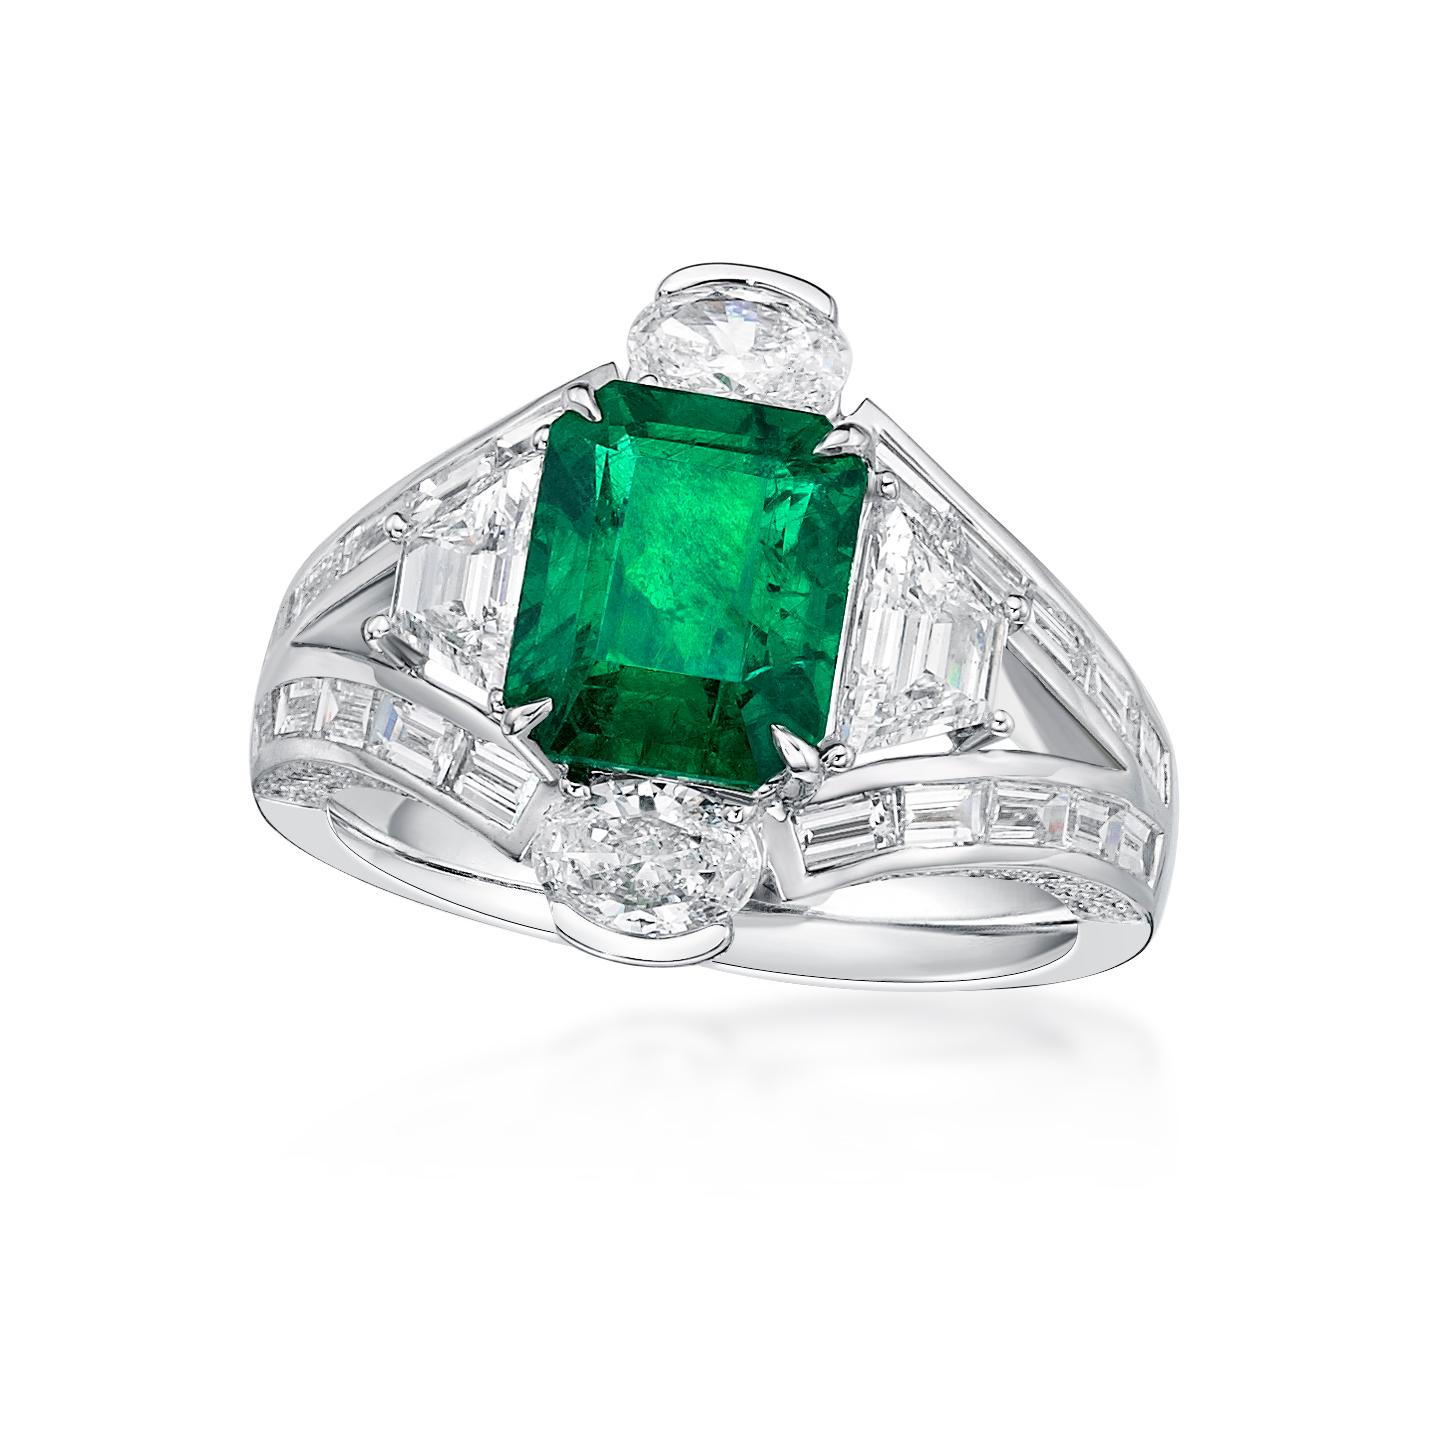 This ring presents a 2.44 carat emerald shape emerald from Zambia with white diamond, finished in white gold. 

EMERALD: 2.44CT
WHITE DIAMOND: 2.42CT /134PCS

Zambian emeralds are rising in popularity in the gemstone world. And they had a desirable